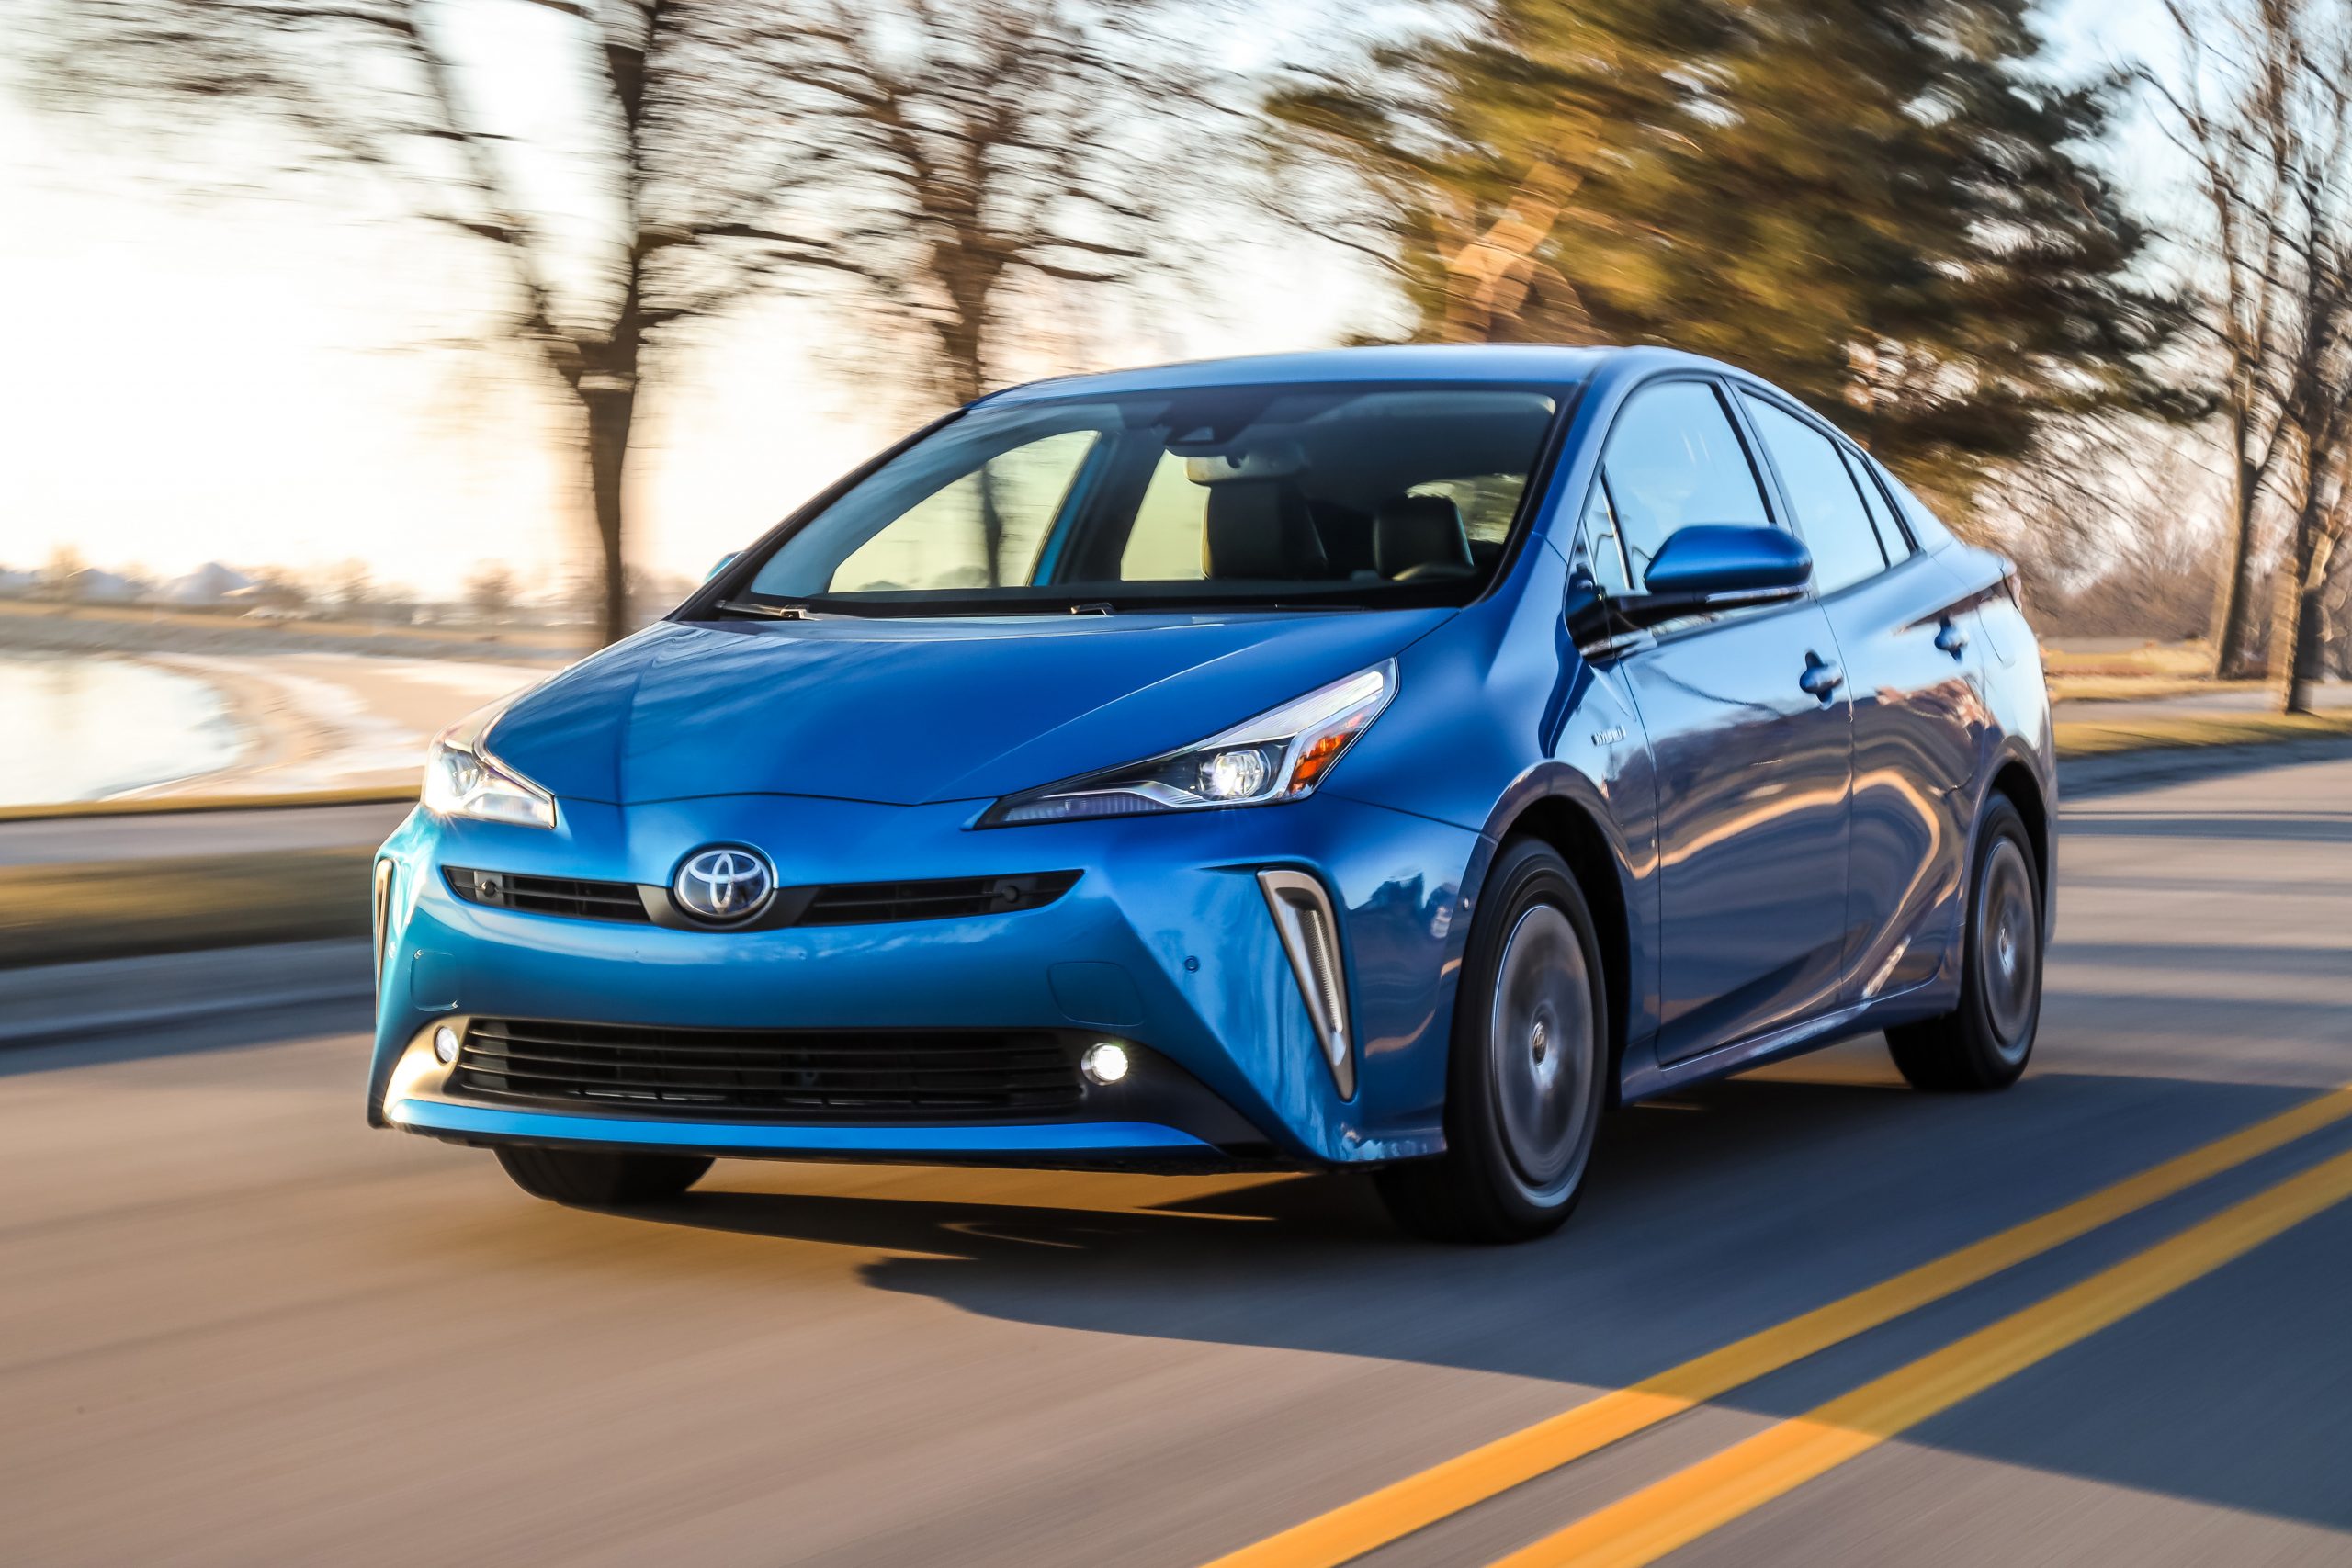 The Toyota Prius Isn’t That Bad, Except For 1 Annoying Feature